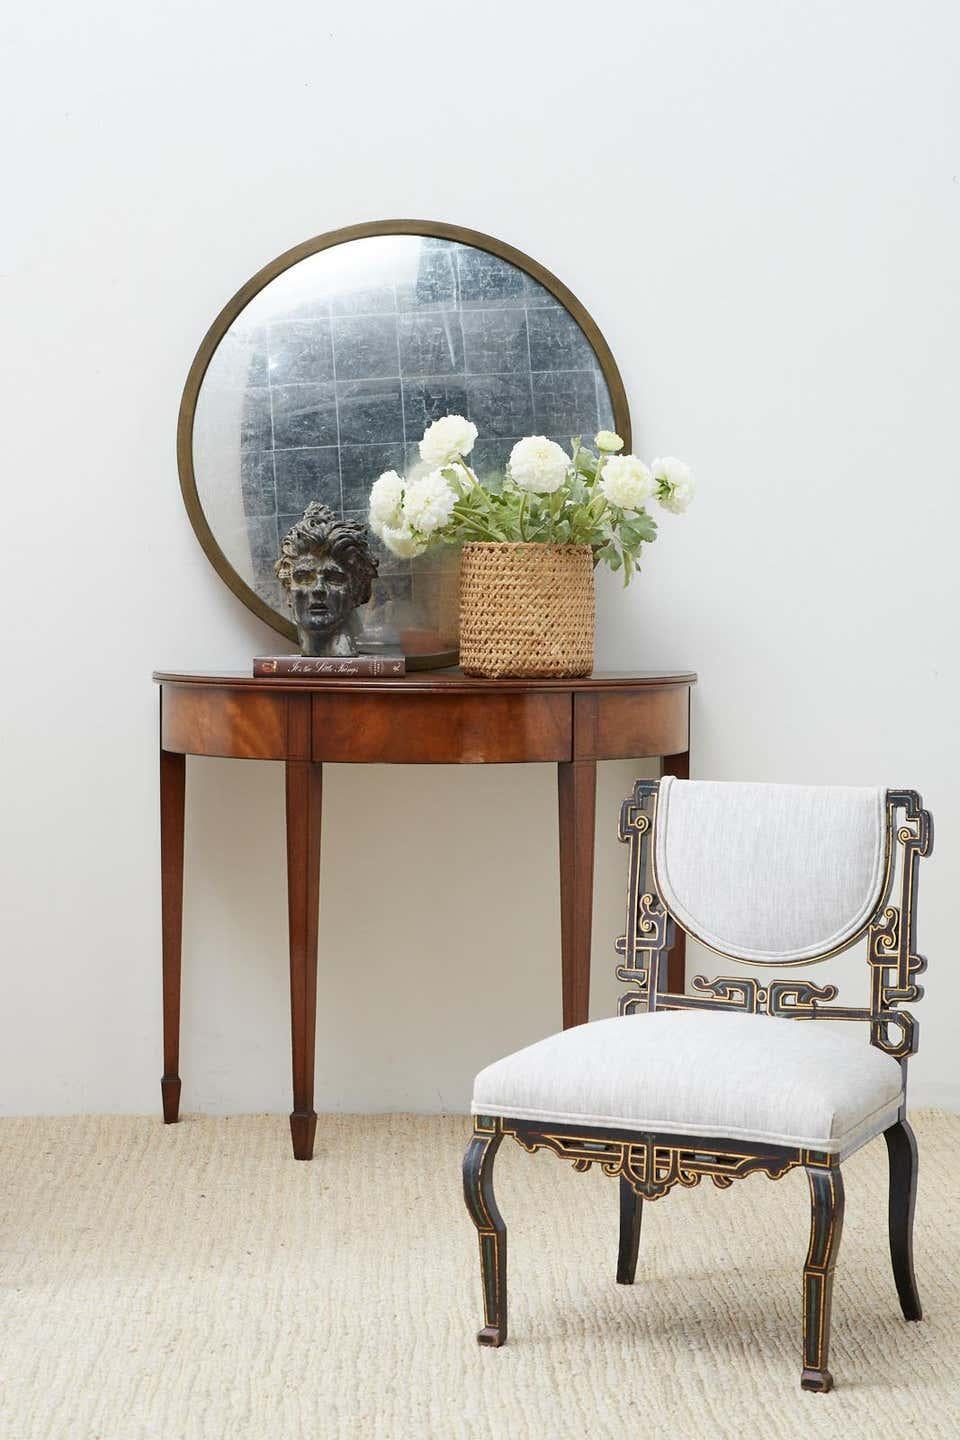 Matched pair of American Hepplewhite or Federal style demilune console tables featuring a flip-top. Constructed from mahogany with intricate neoclassical style design motifs on the frieze and delicate thread inlay of fruitwood. The flip-tops open to